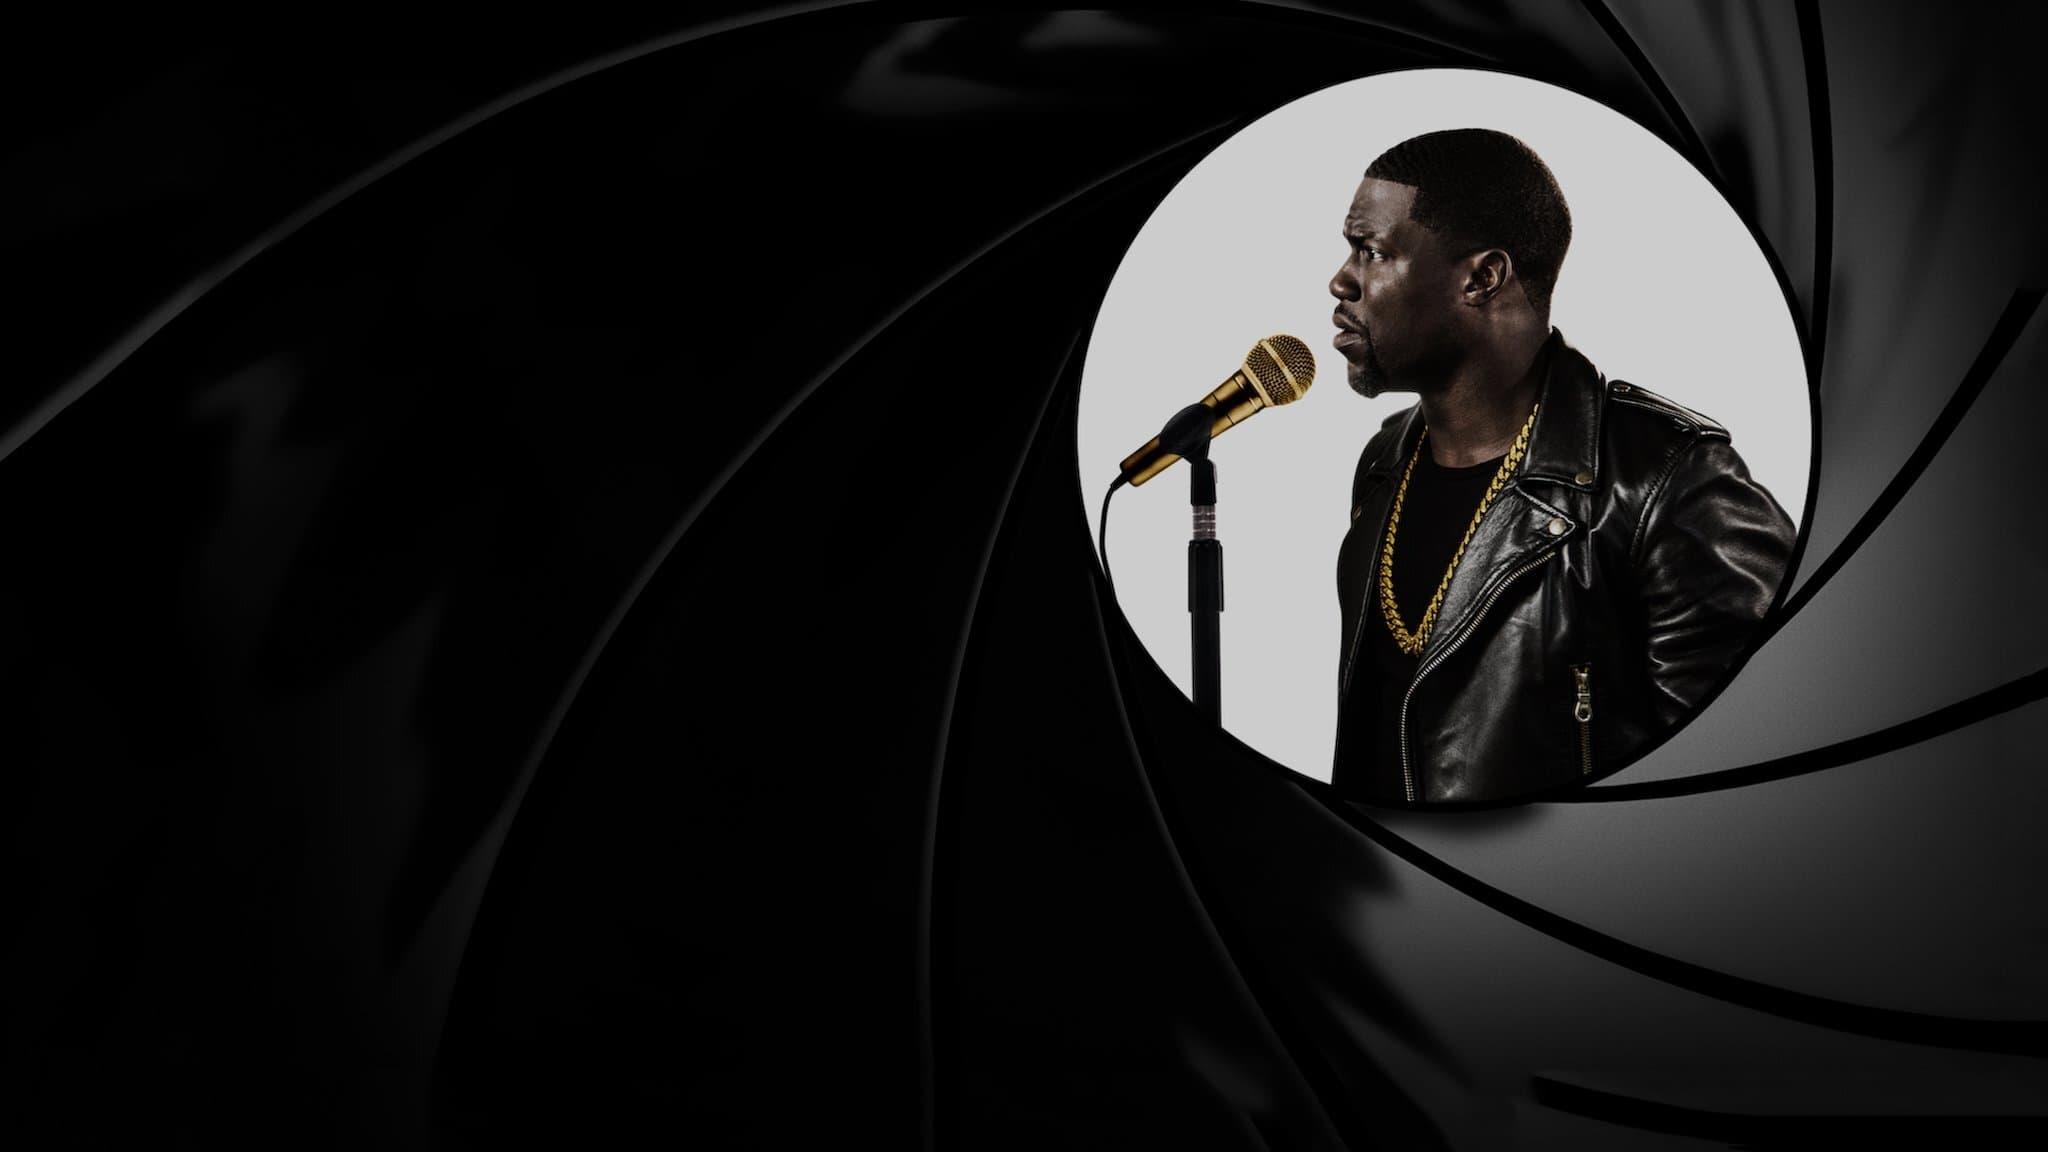 Kevin Hart: What Now? backdrop